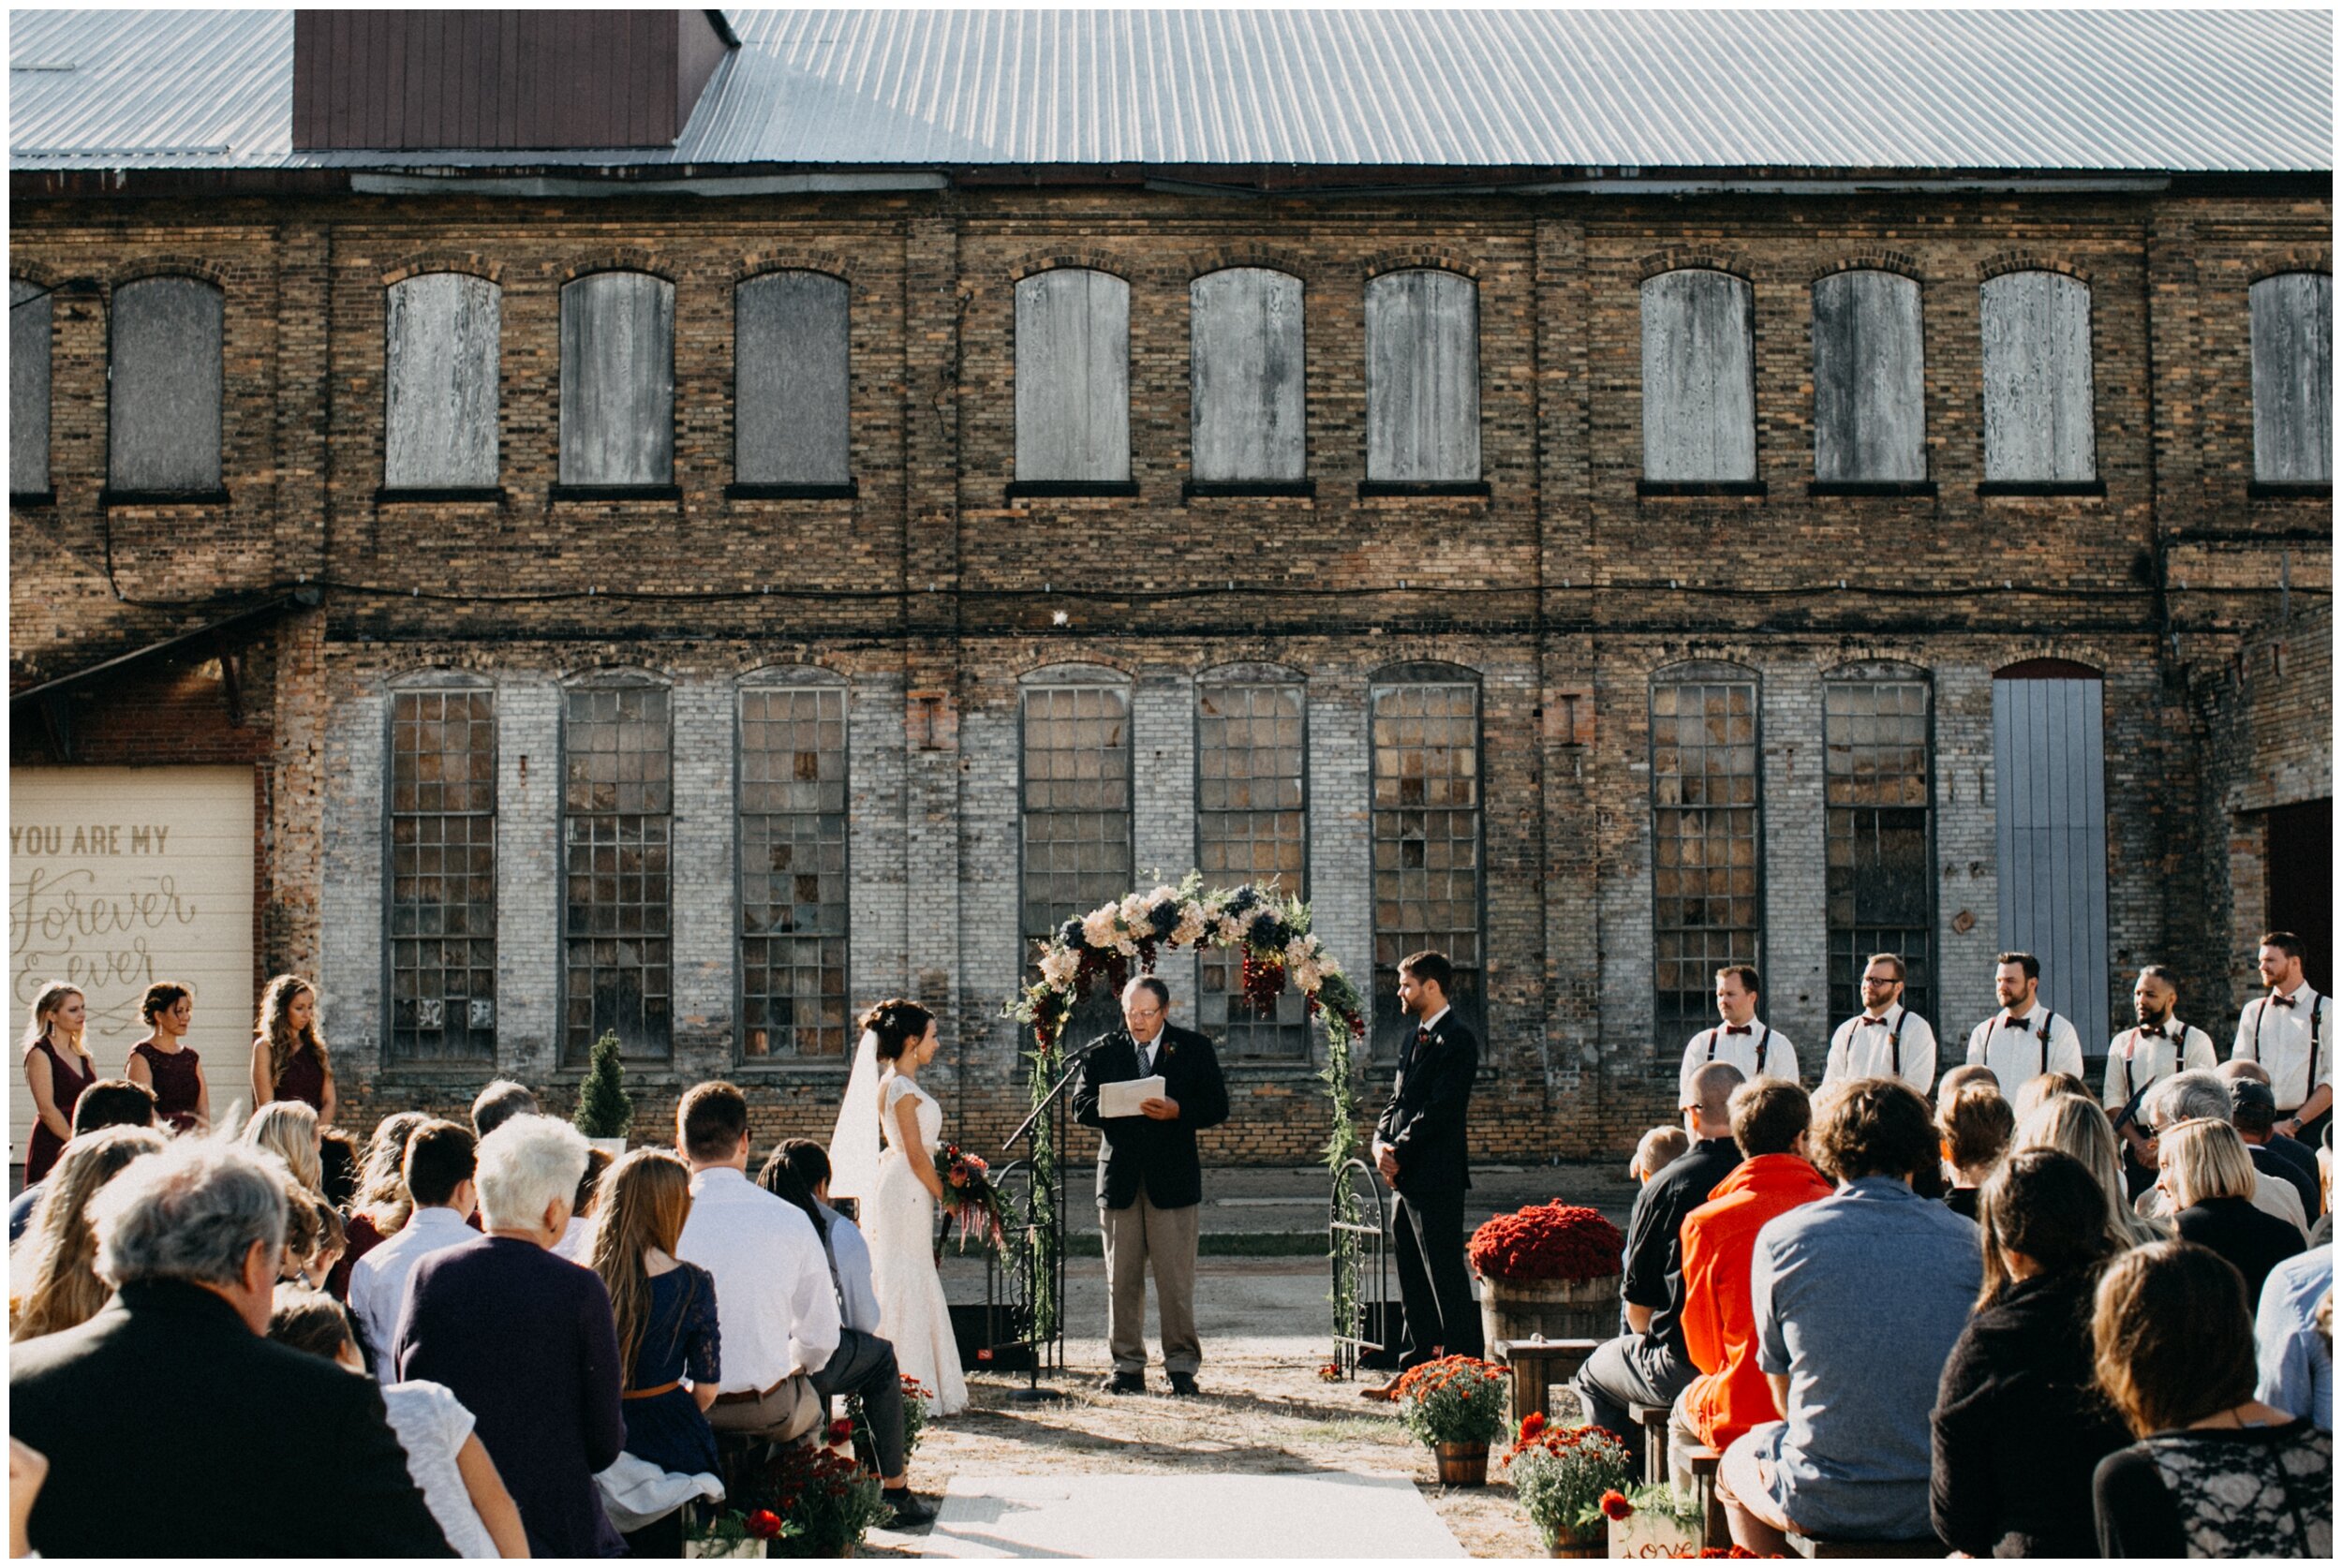 Industrial warehouse wedding ceremony at the Northern Pacific Center in Brainerd, Minnesota